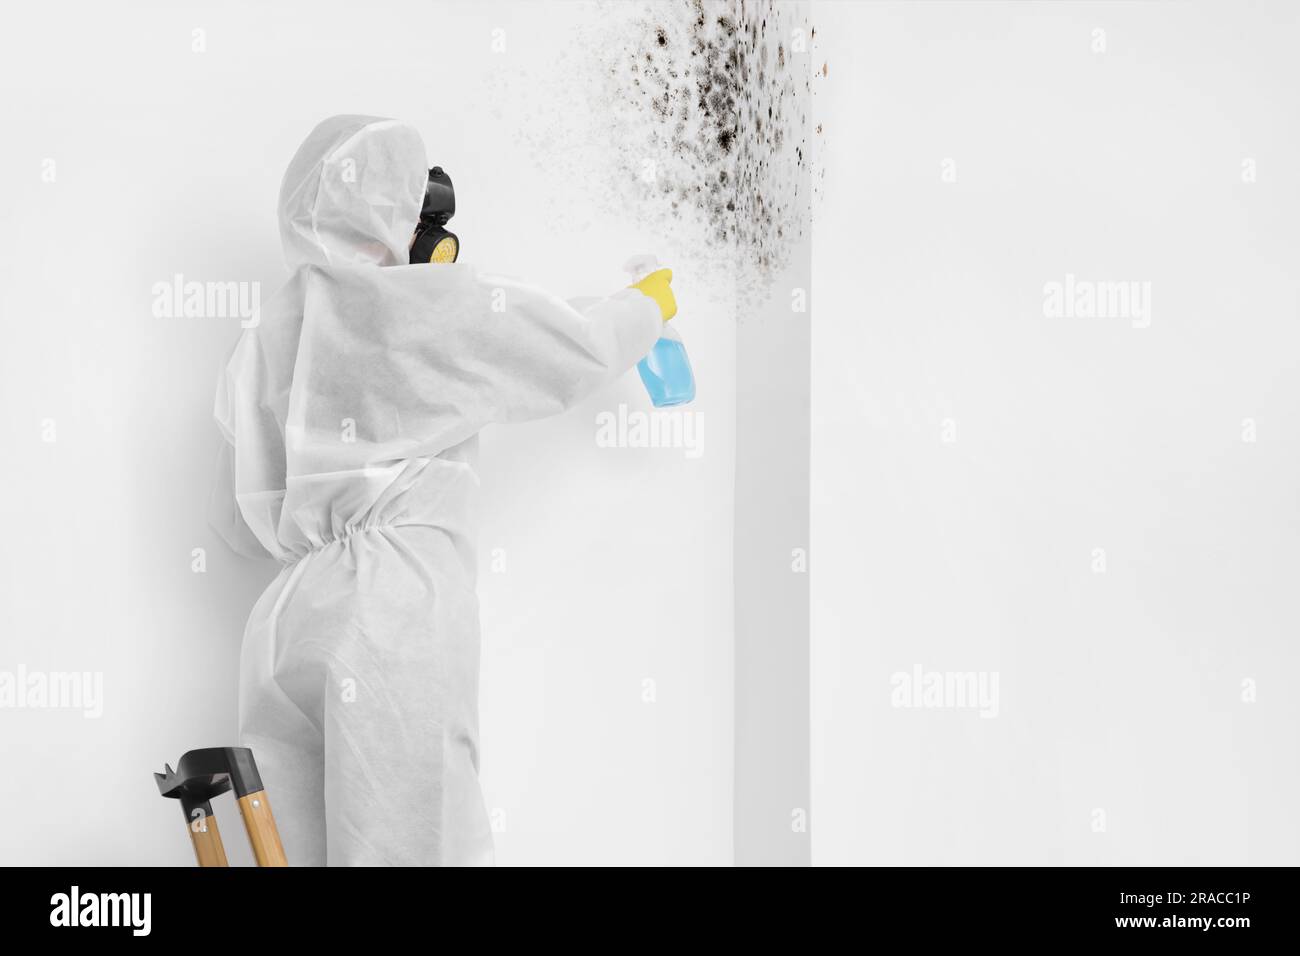 Woman in protective suit and rubber gloves using mold remover on wall Stock Photo